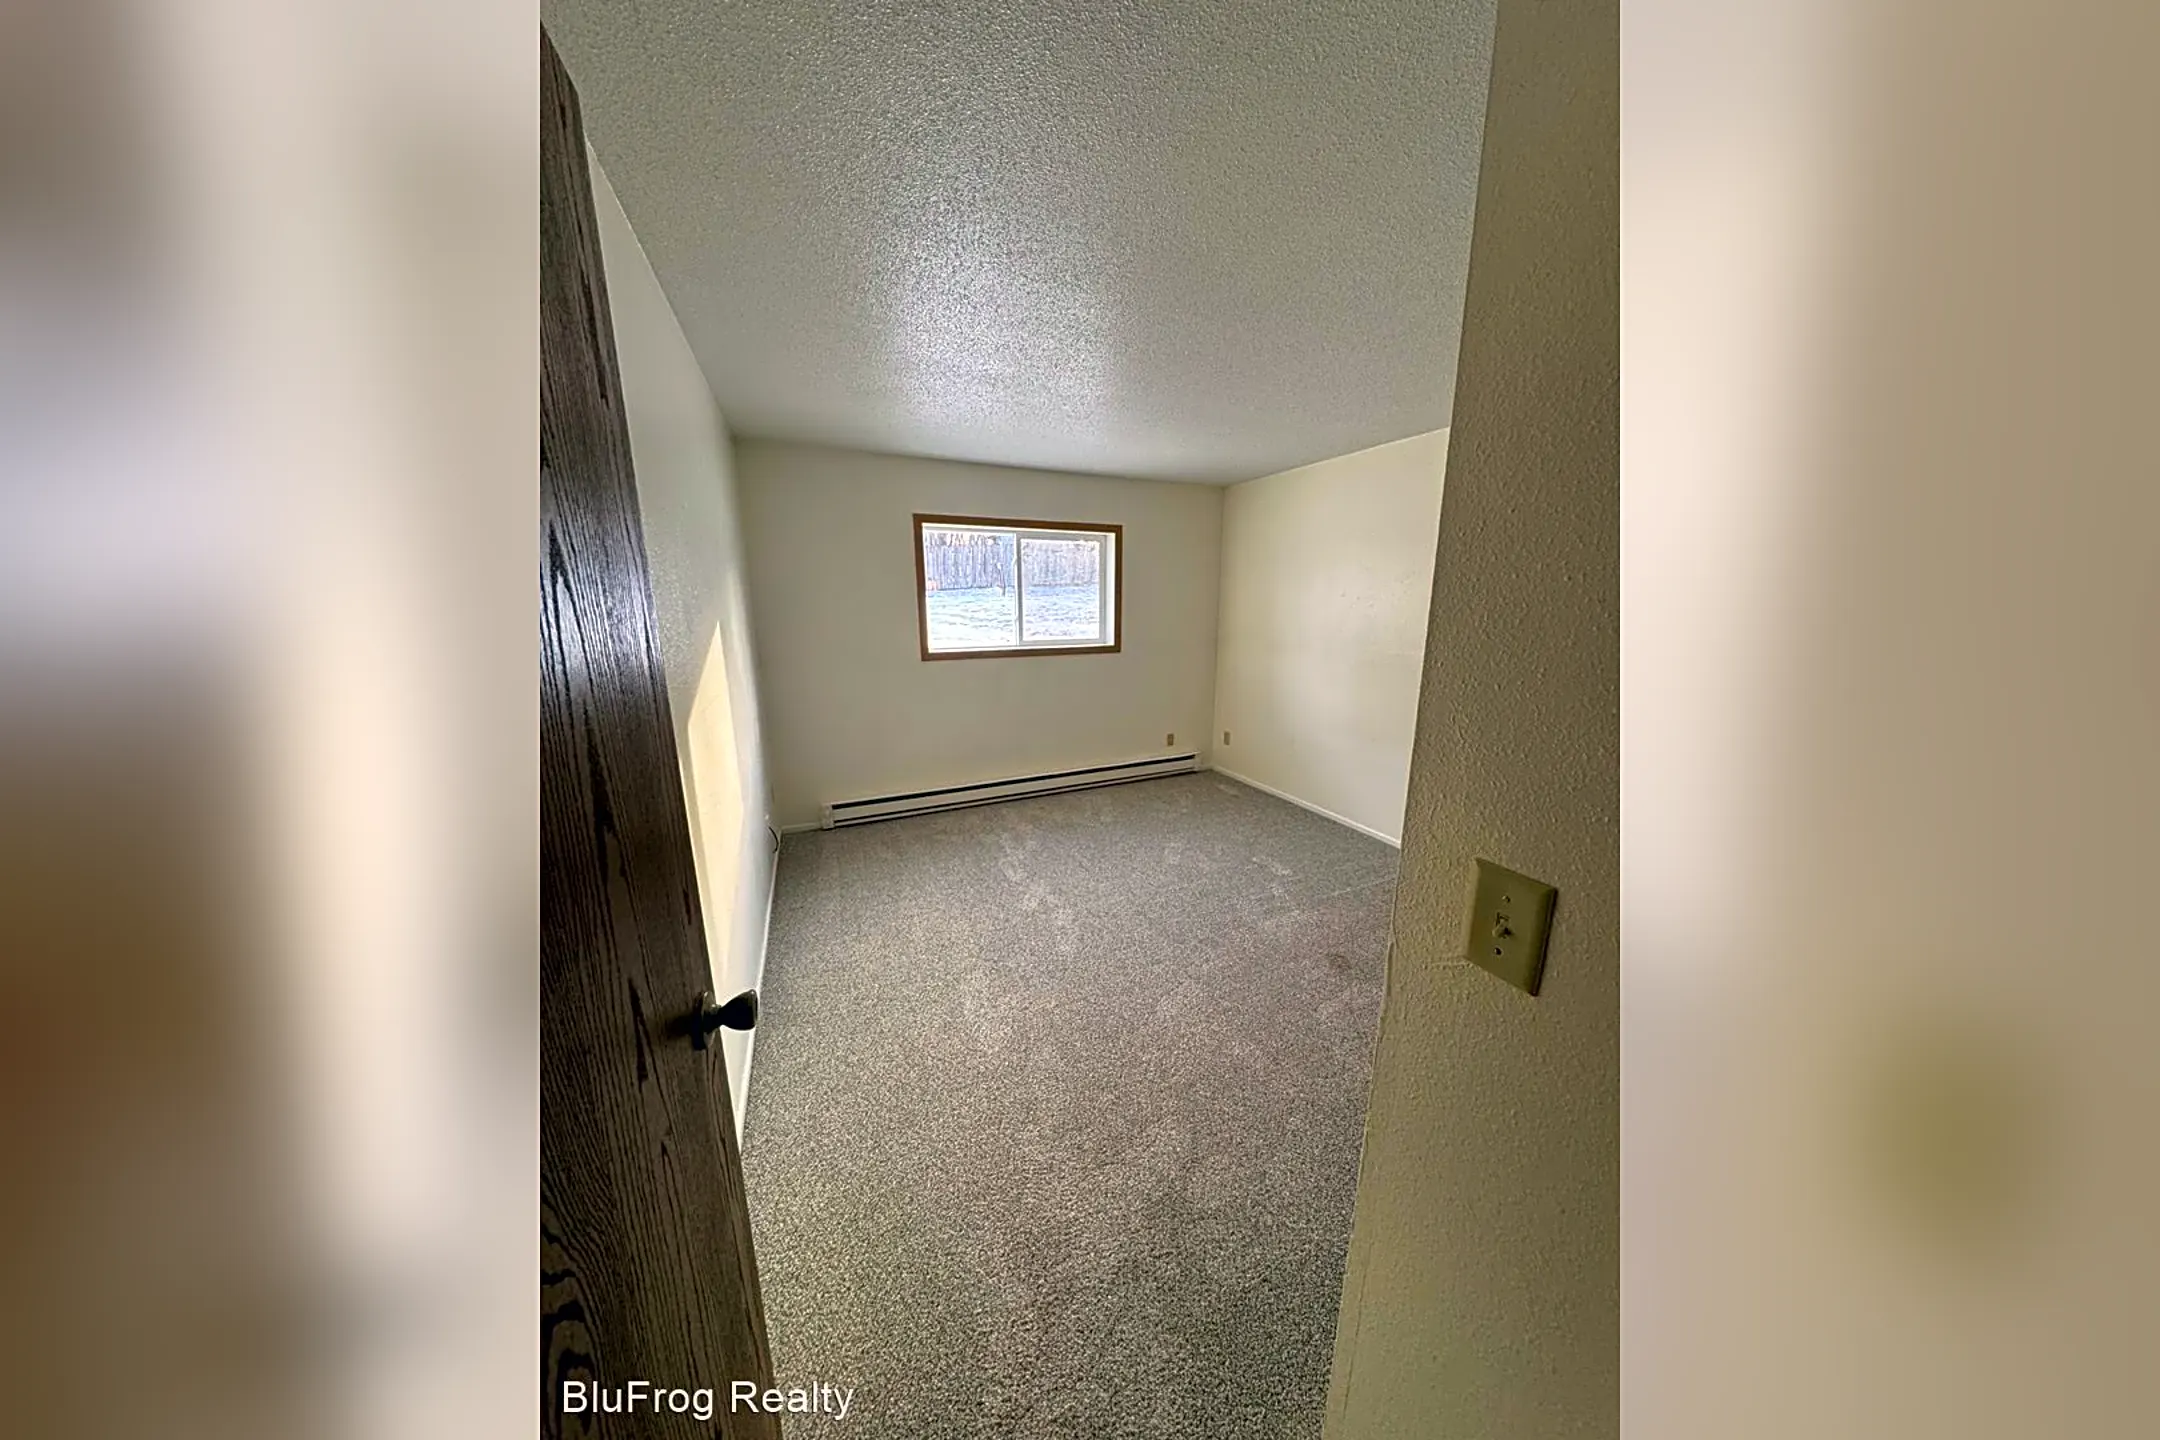 Bedroom - 1604 16th Ave SW - Jamestown, ND